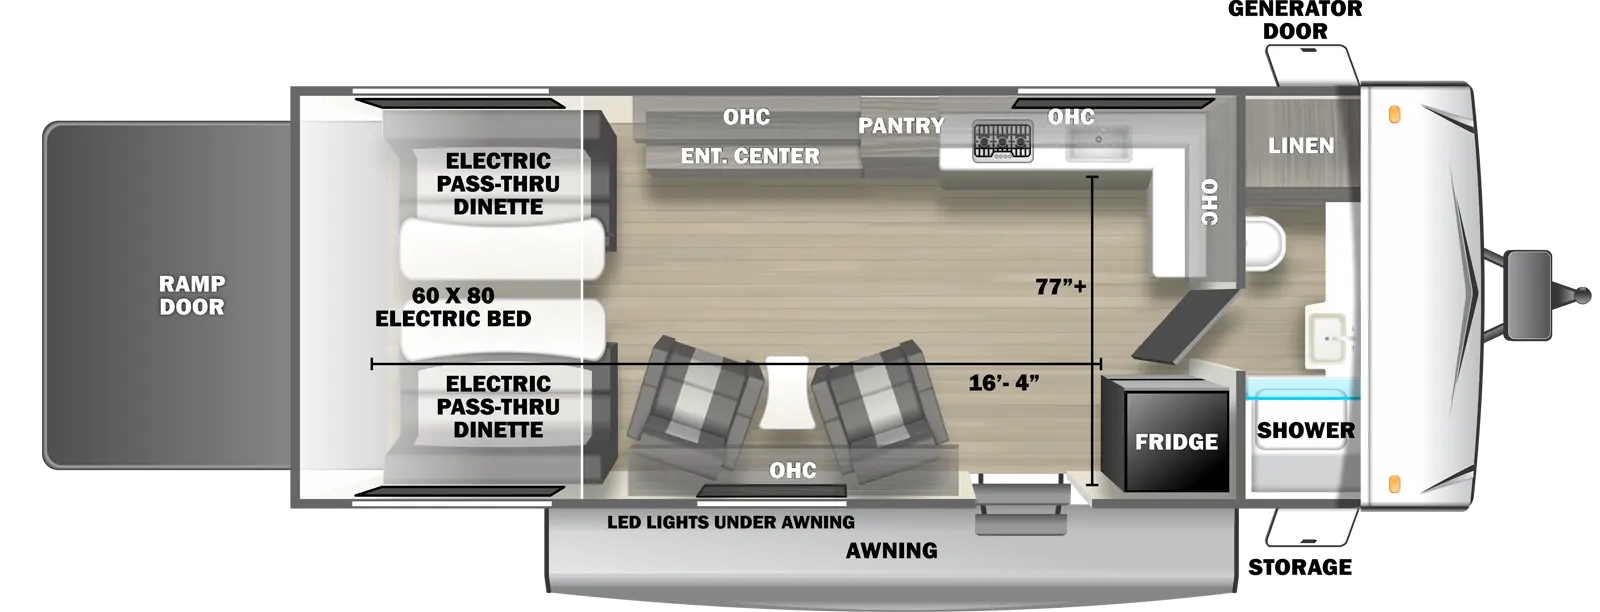 The 2450SLX travel trailer has no slide outs, 1 entry door and 1 rear ramp door. Exterior features include an awning with LED lights, front door side storage and front off-door side generator door. Interior layout from front to back includes: front bathroom with linen storage, toilet, countertop, sink and shower; kitchen with refrigerator next to entry door, L-shaped off-door side countertop with overhead cabinets, stovetop, and kitchen sink; off-door side pantry; 2 door side recliners with end table; off-door side entertainment center across from the recliners; and rear electric 60 x 80 bed with opposing side electric pass-through dinette. Cargo length from rear of unit to refrigerator is 16 ft. 4 in. Cargo width from kitchen countertop to door side wall is 77 inches.